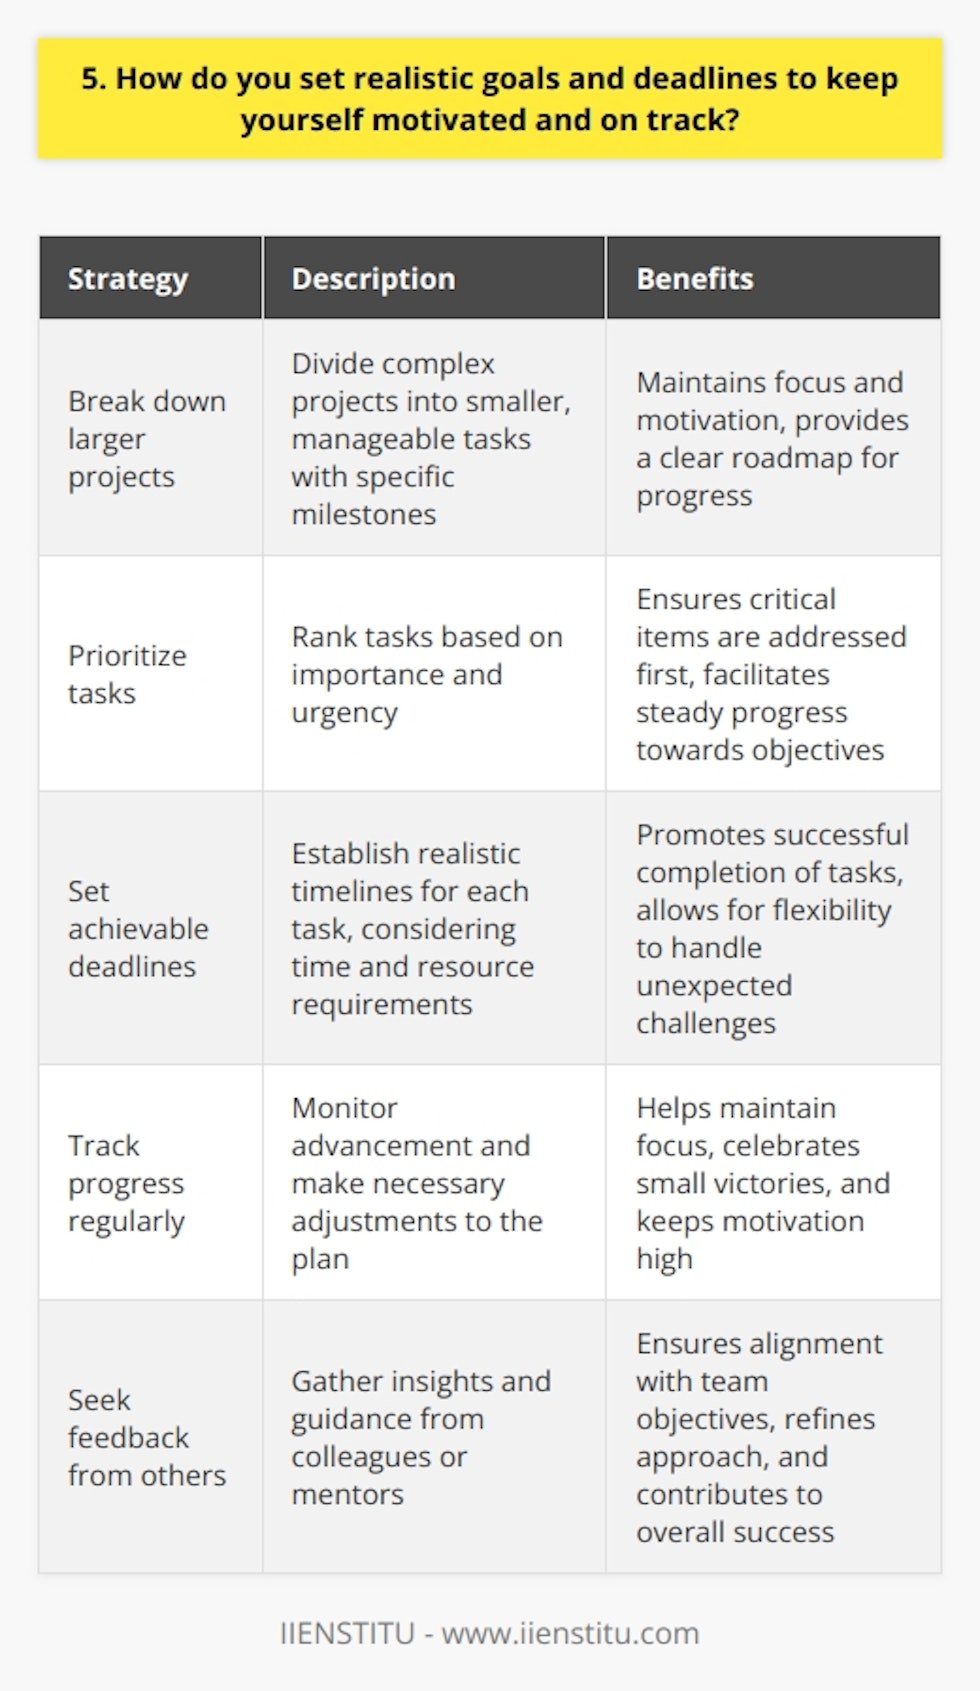 When it comes to setting realistic goals and deadlines, I find that breaking down larger projects into smaller, manageable tasks is key. By creating a clear roadmap with specific milestones, I can stay focused and motivated throughout the process. Prioritizing Tasks I prioritize tasks based on their importance and urgency. This helps me tackle the most critical items first and ensures that Im making steady progress towards my overall objectives. Setting Achievable Deadlines I set achievable deadlines for each task, considering the time and resources required. I also build in some flexibility to account for unexpected challenges or delays. Tracking Progress To stay on track, I regularly review my progress and adjust my plan as needed. I find that celebrating small victories along the way helps keep me motivated and energized. Seeking Feedback I also seek feedback from colleagues or mentors to ensure that my goals align with the teams objectives. Their insights and guidance help me refine my approach and stay on course. By setting realistic goals, prioritizing tasks, and tracking progress, Ive been able to consistently meet deadlines and deliver high-quality results. I believe this approach would serve me well in this role and contribute to the teams success.